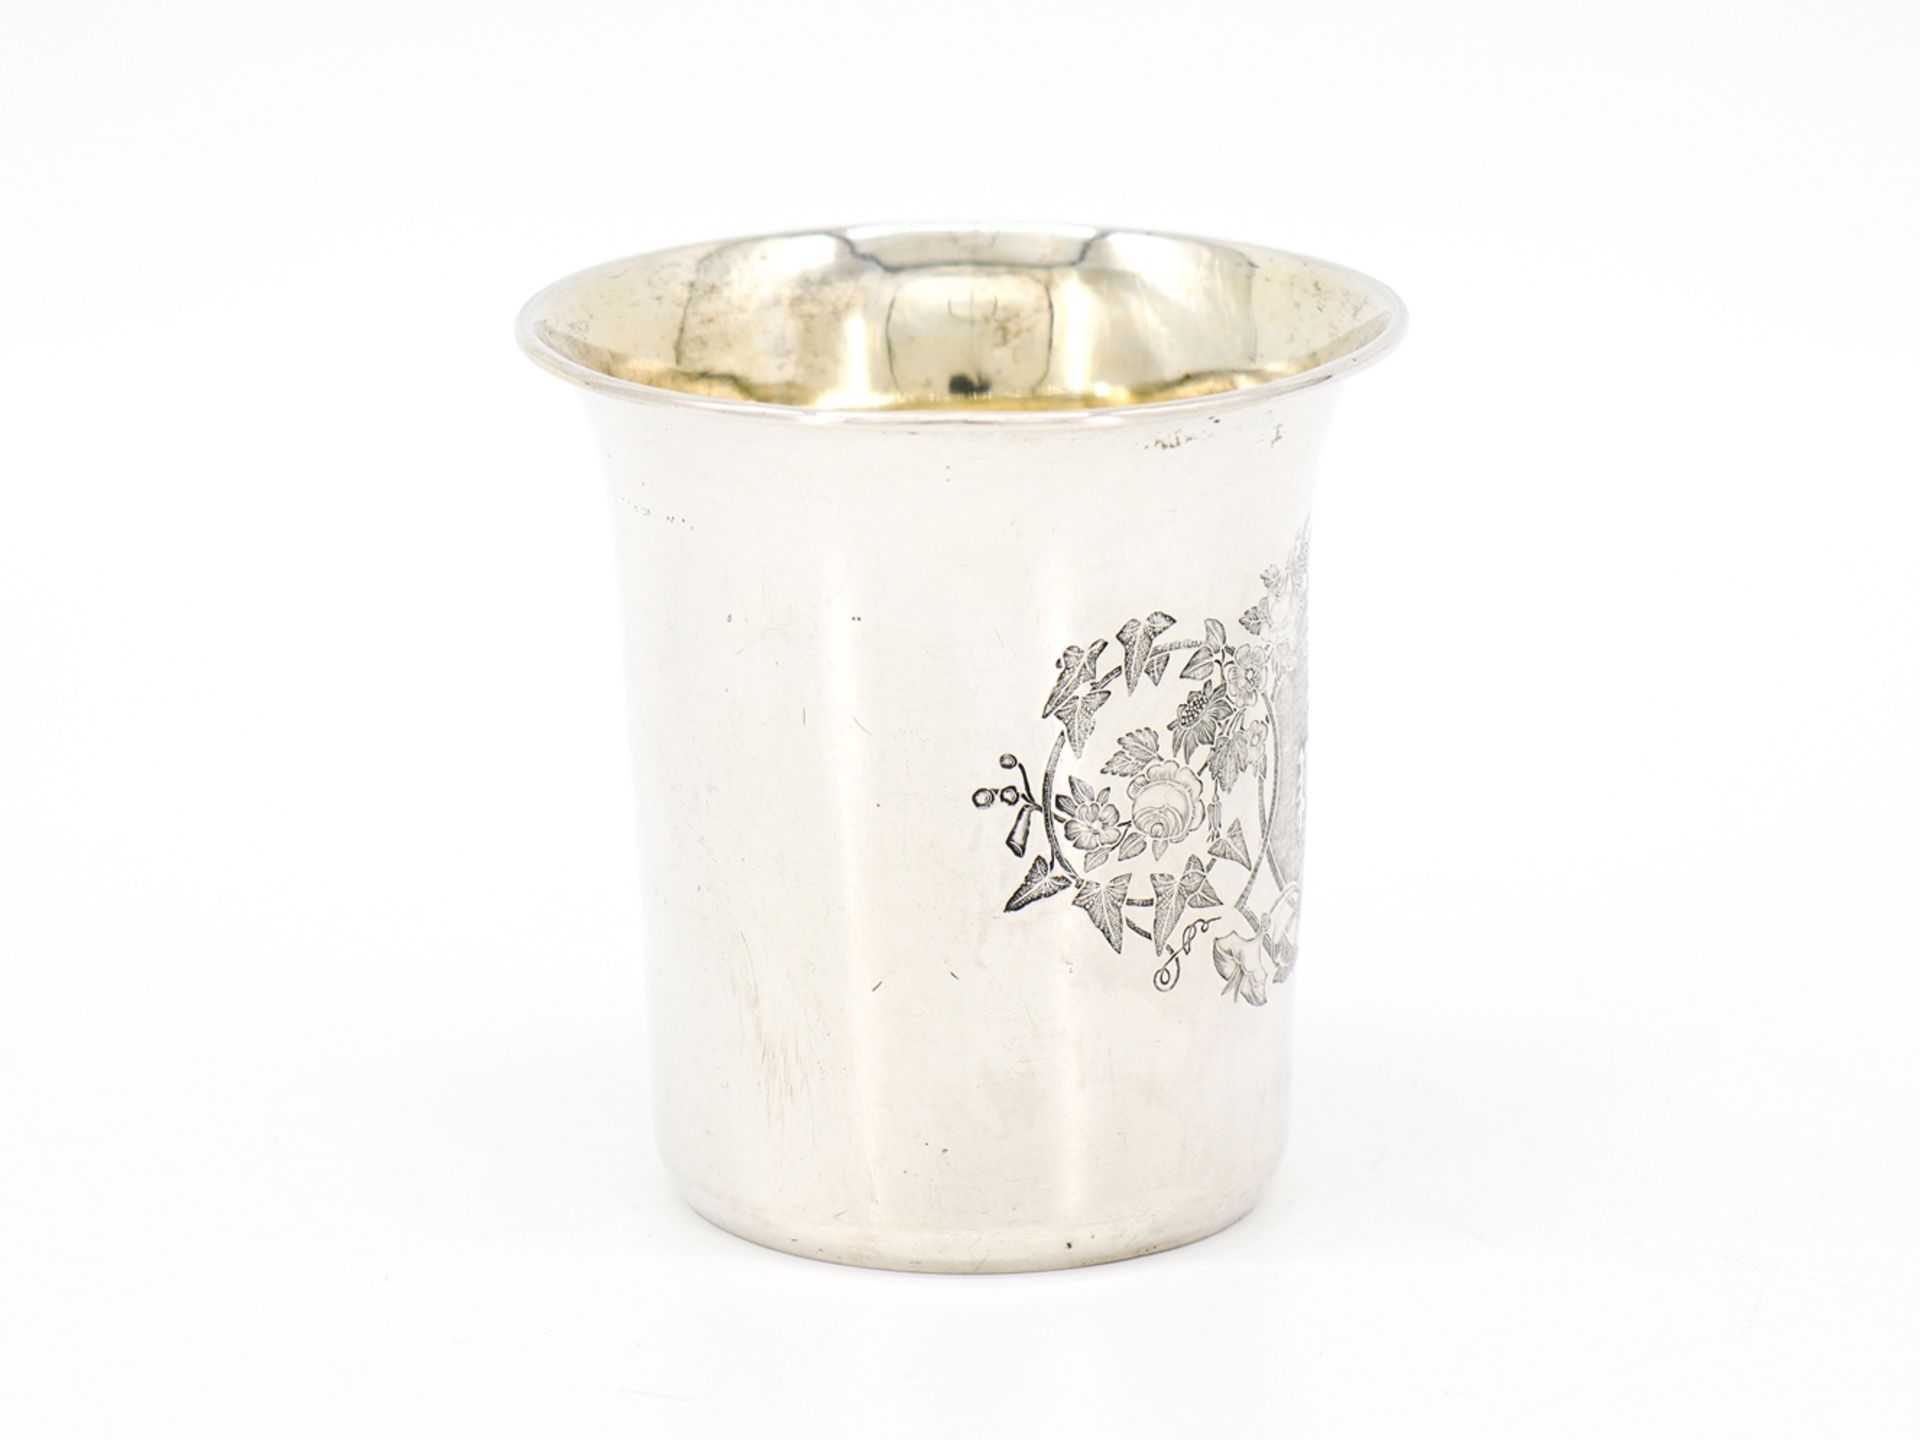 Baptismal cup silver gilded inside, mid 19th century. - Image 4 of 6